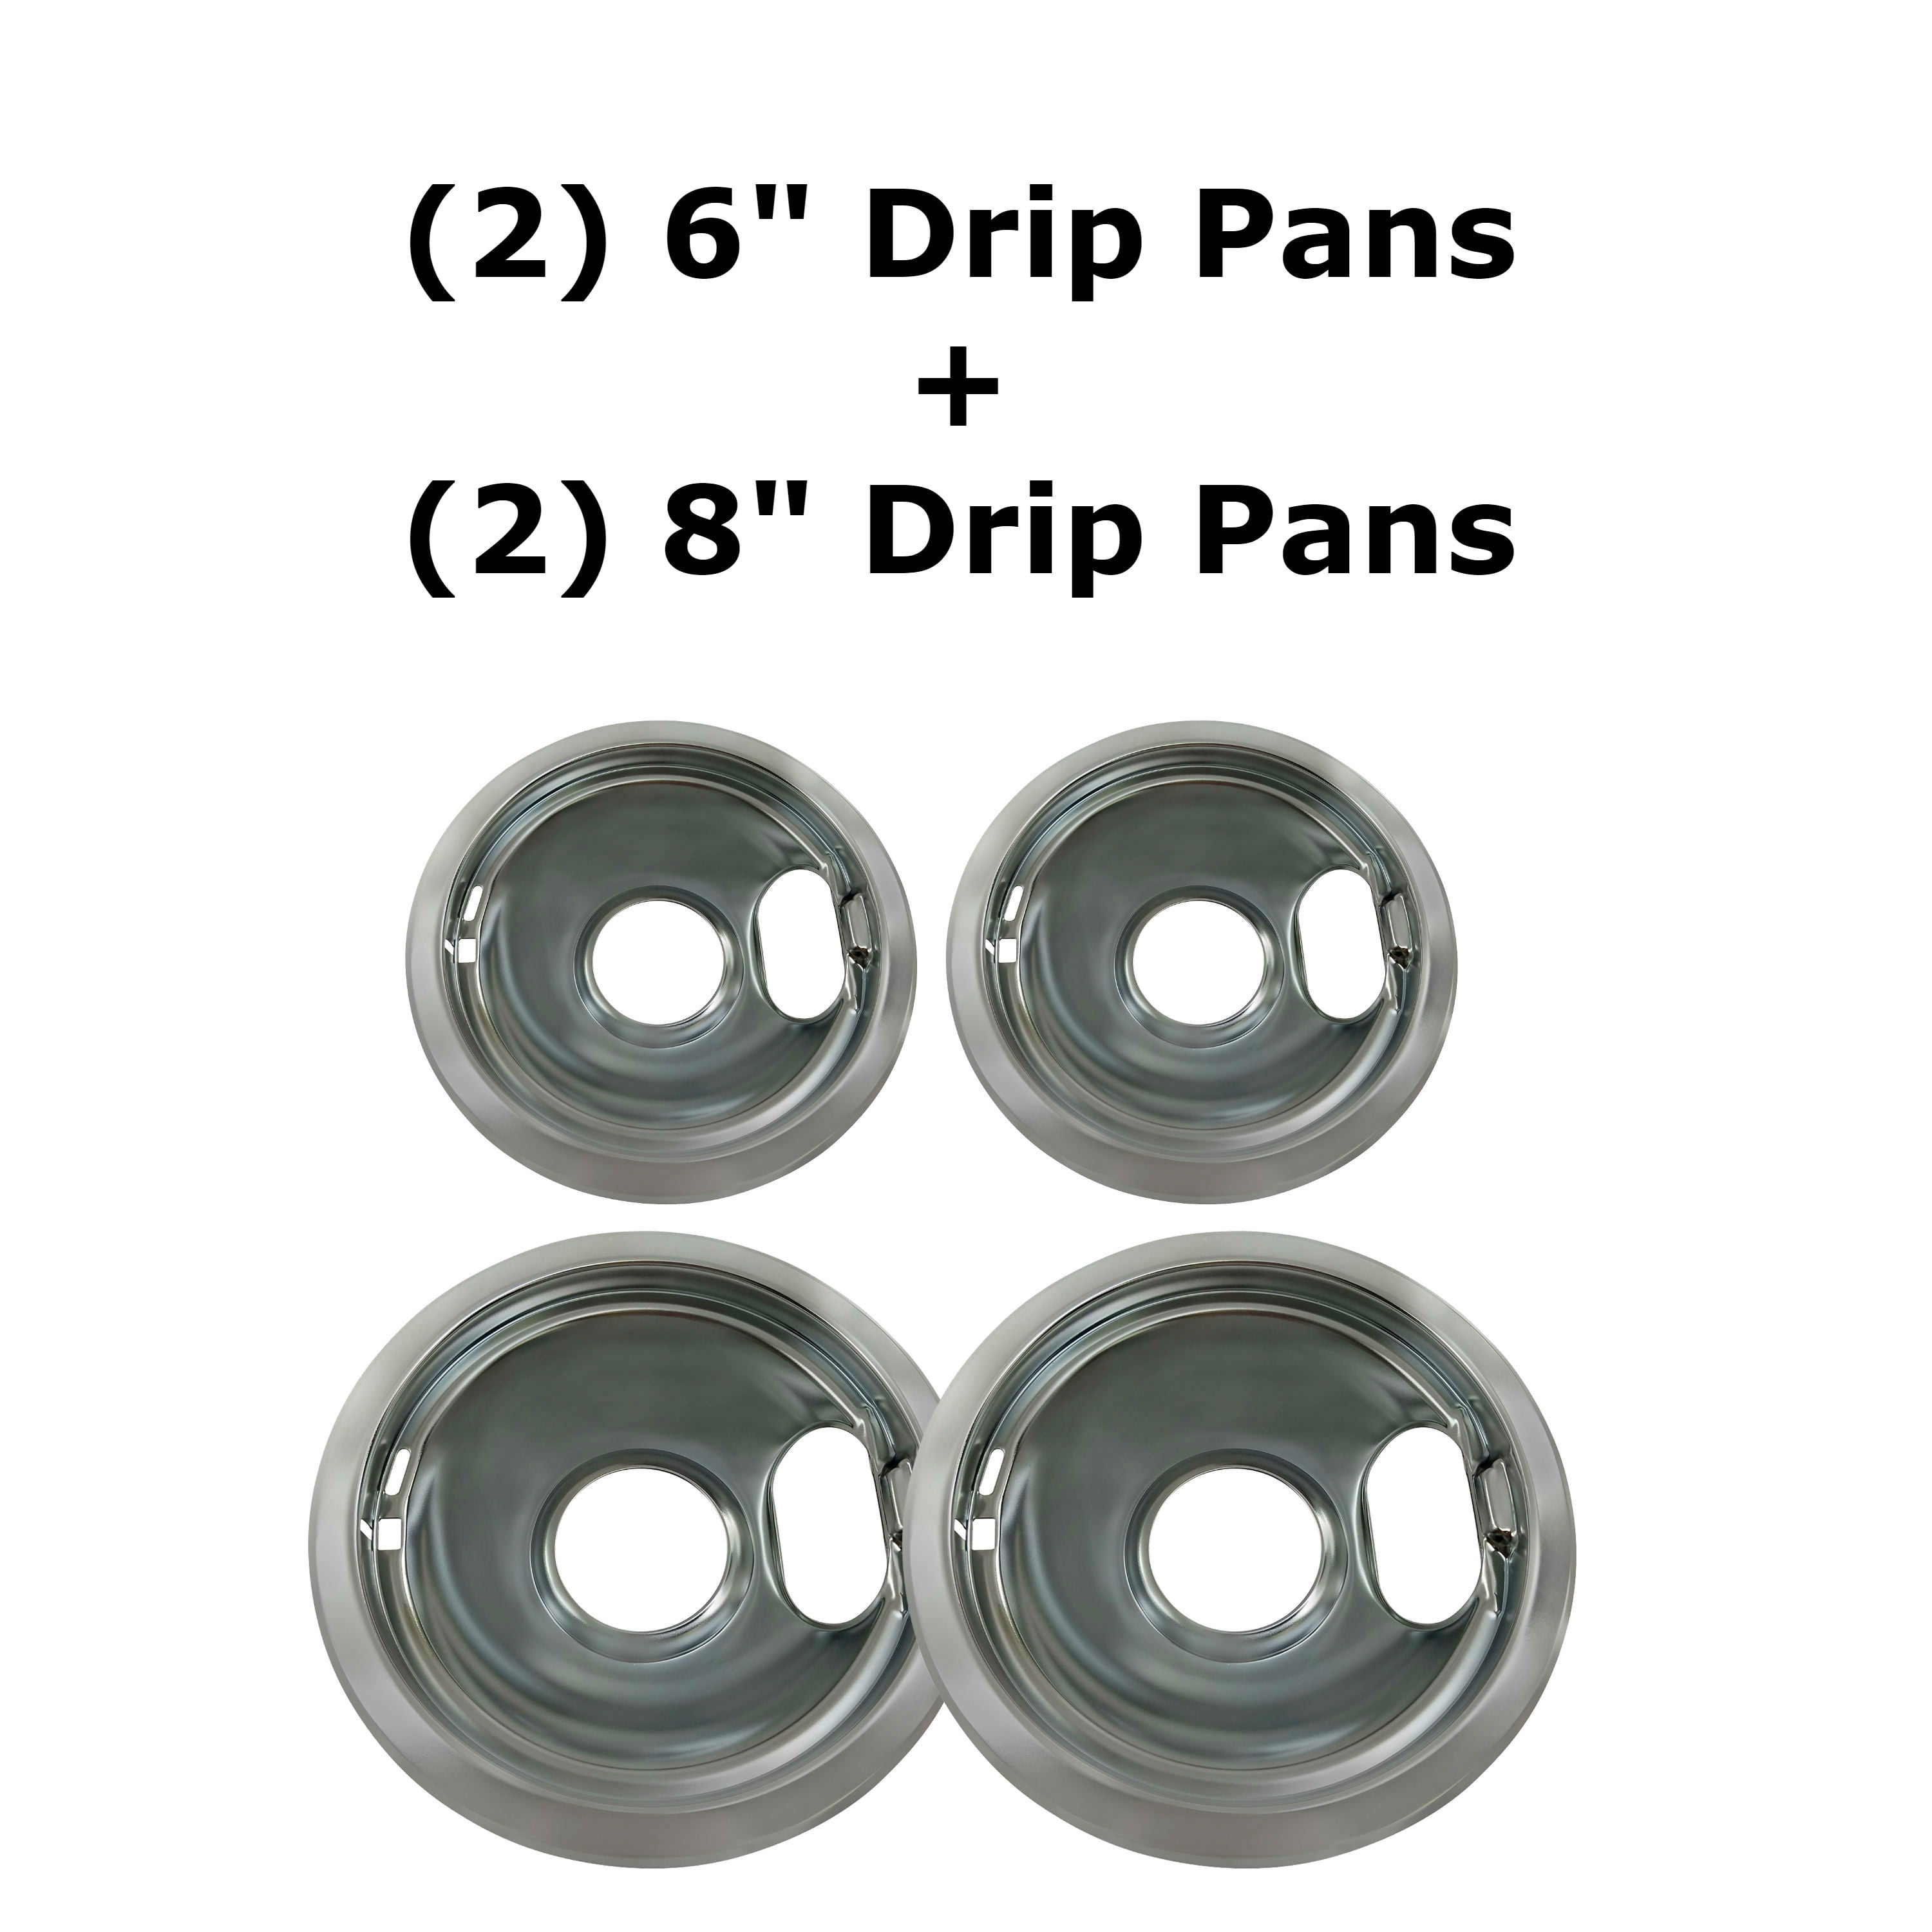 Kitchen Basics 101 Porcelain Drip Pan Set Replacement for Whirlpool W10288051 